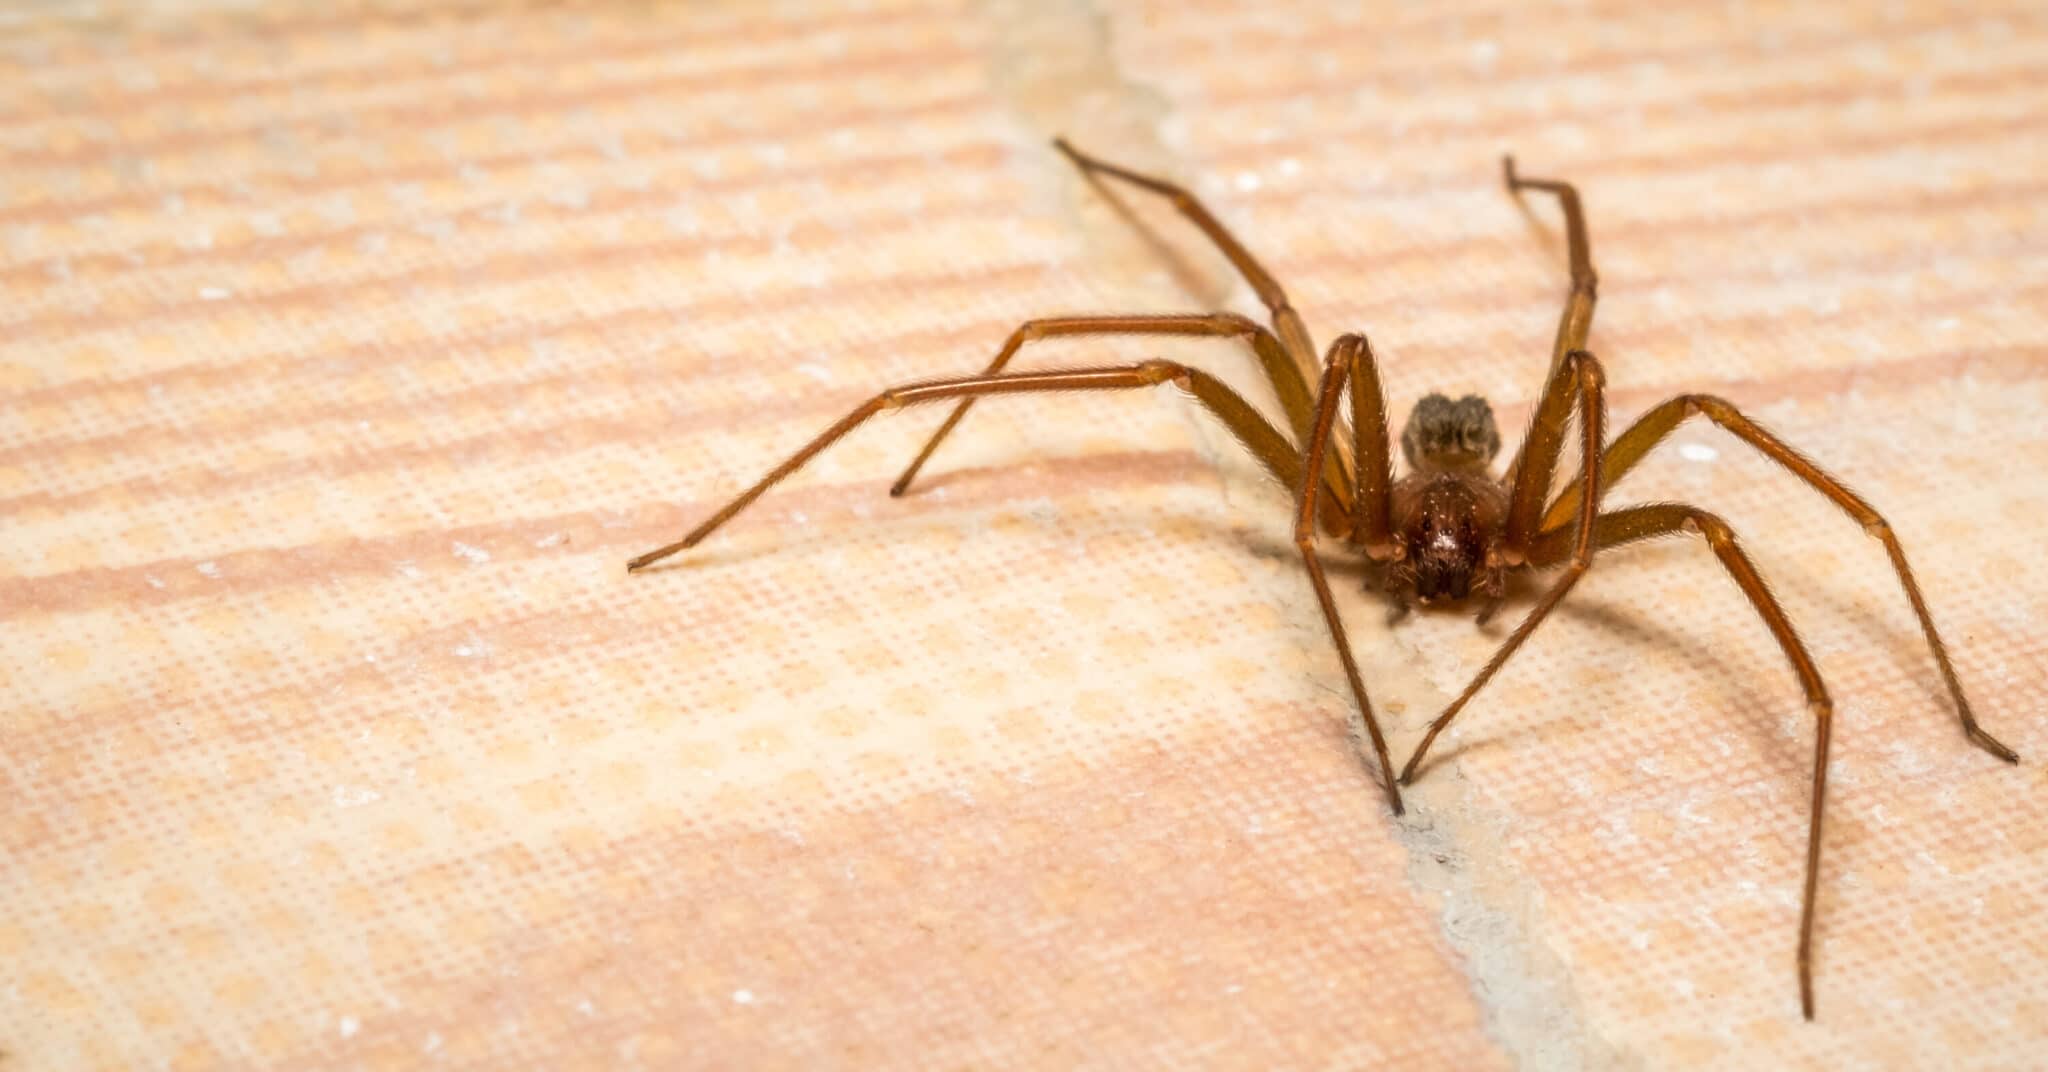 Brown Recluse Spiders Control - Information, Bites, & More